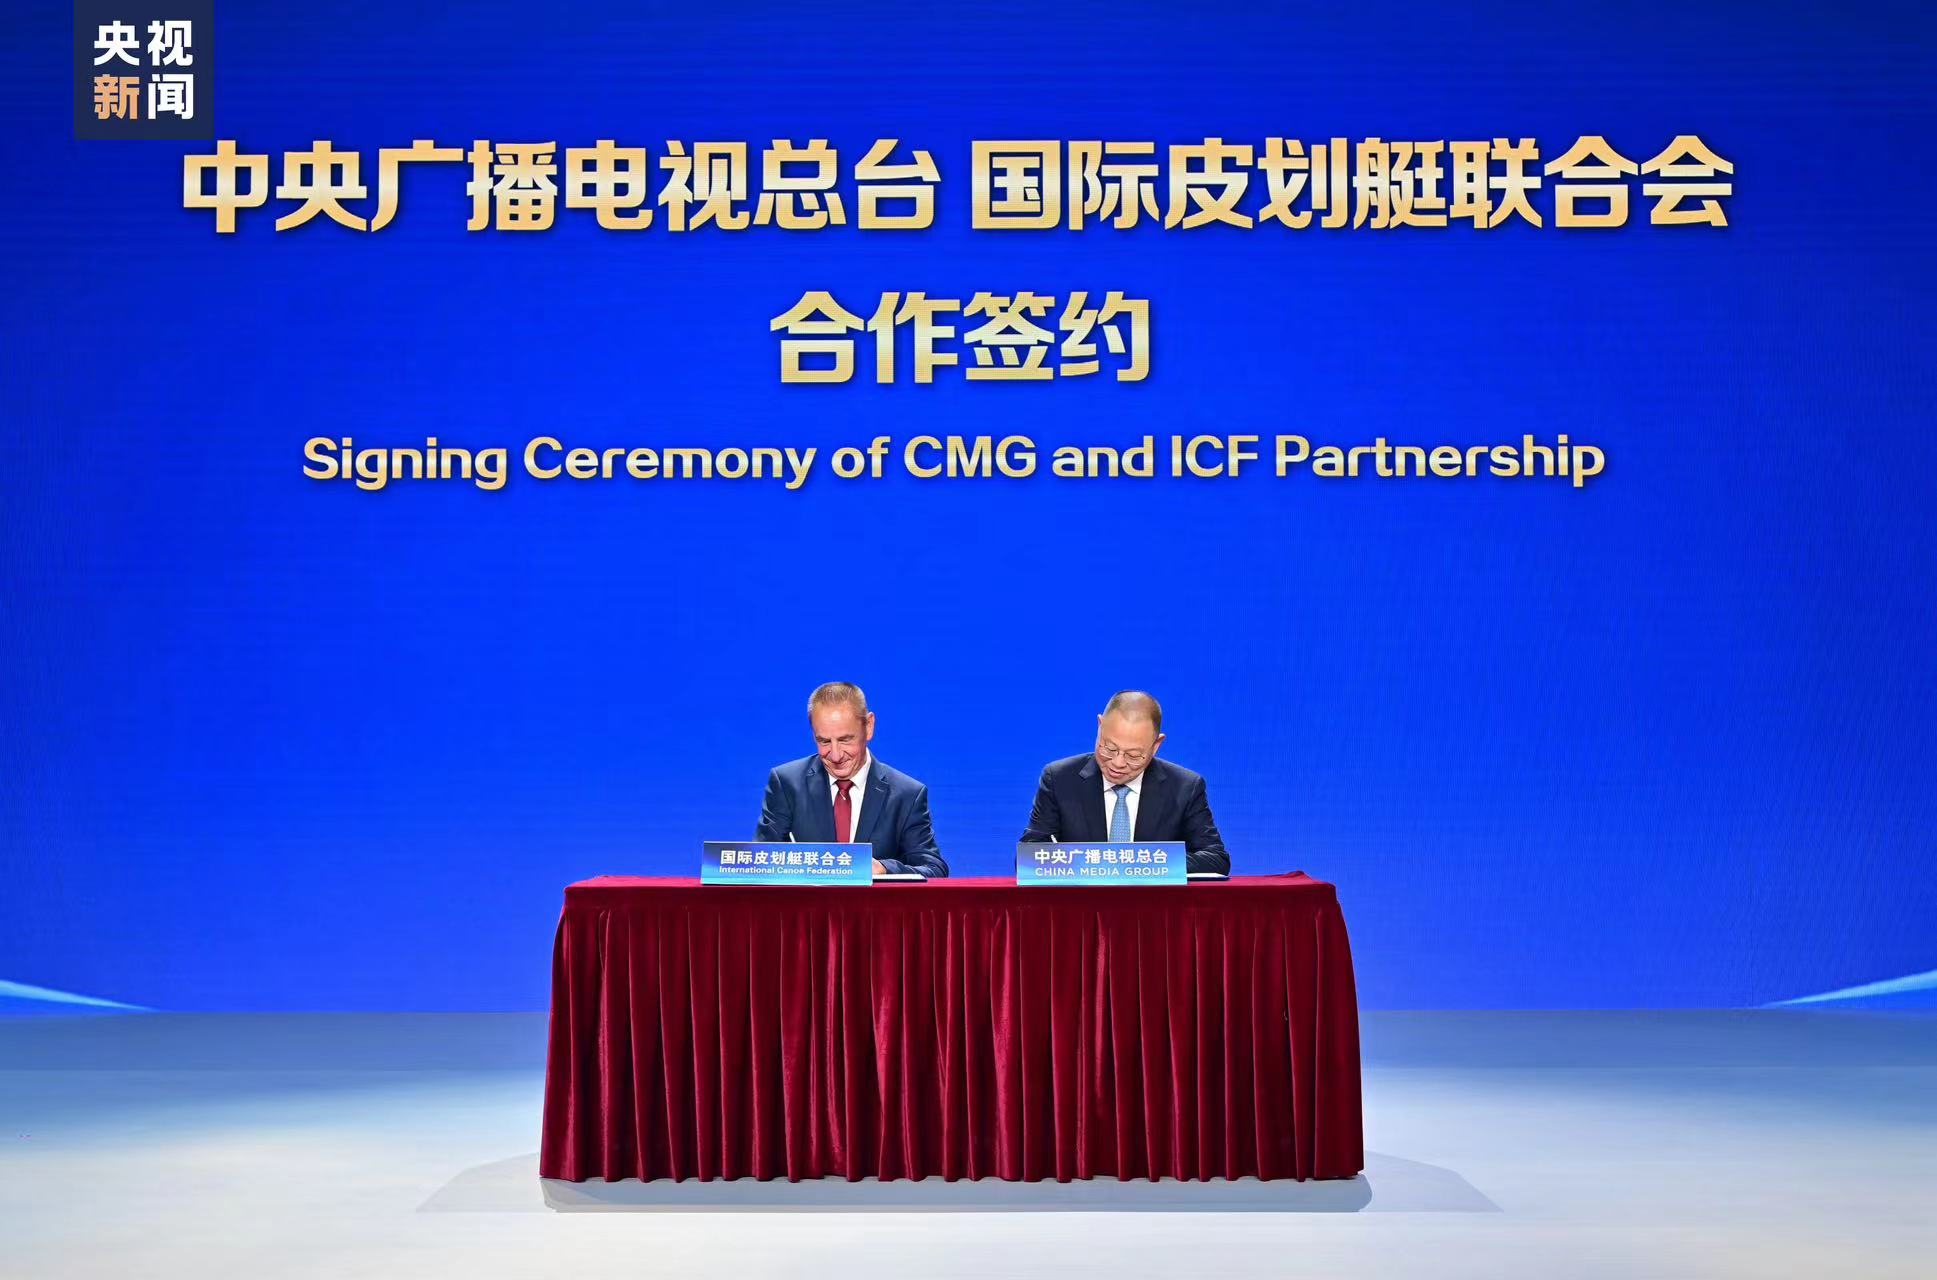 ICF President Thomas Konietzko (L) and Xue Jijun, a CMG editorial board member sign the memo at the ceremony. /CFP